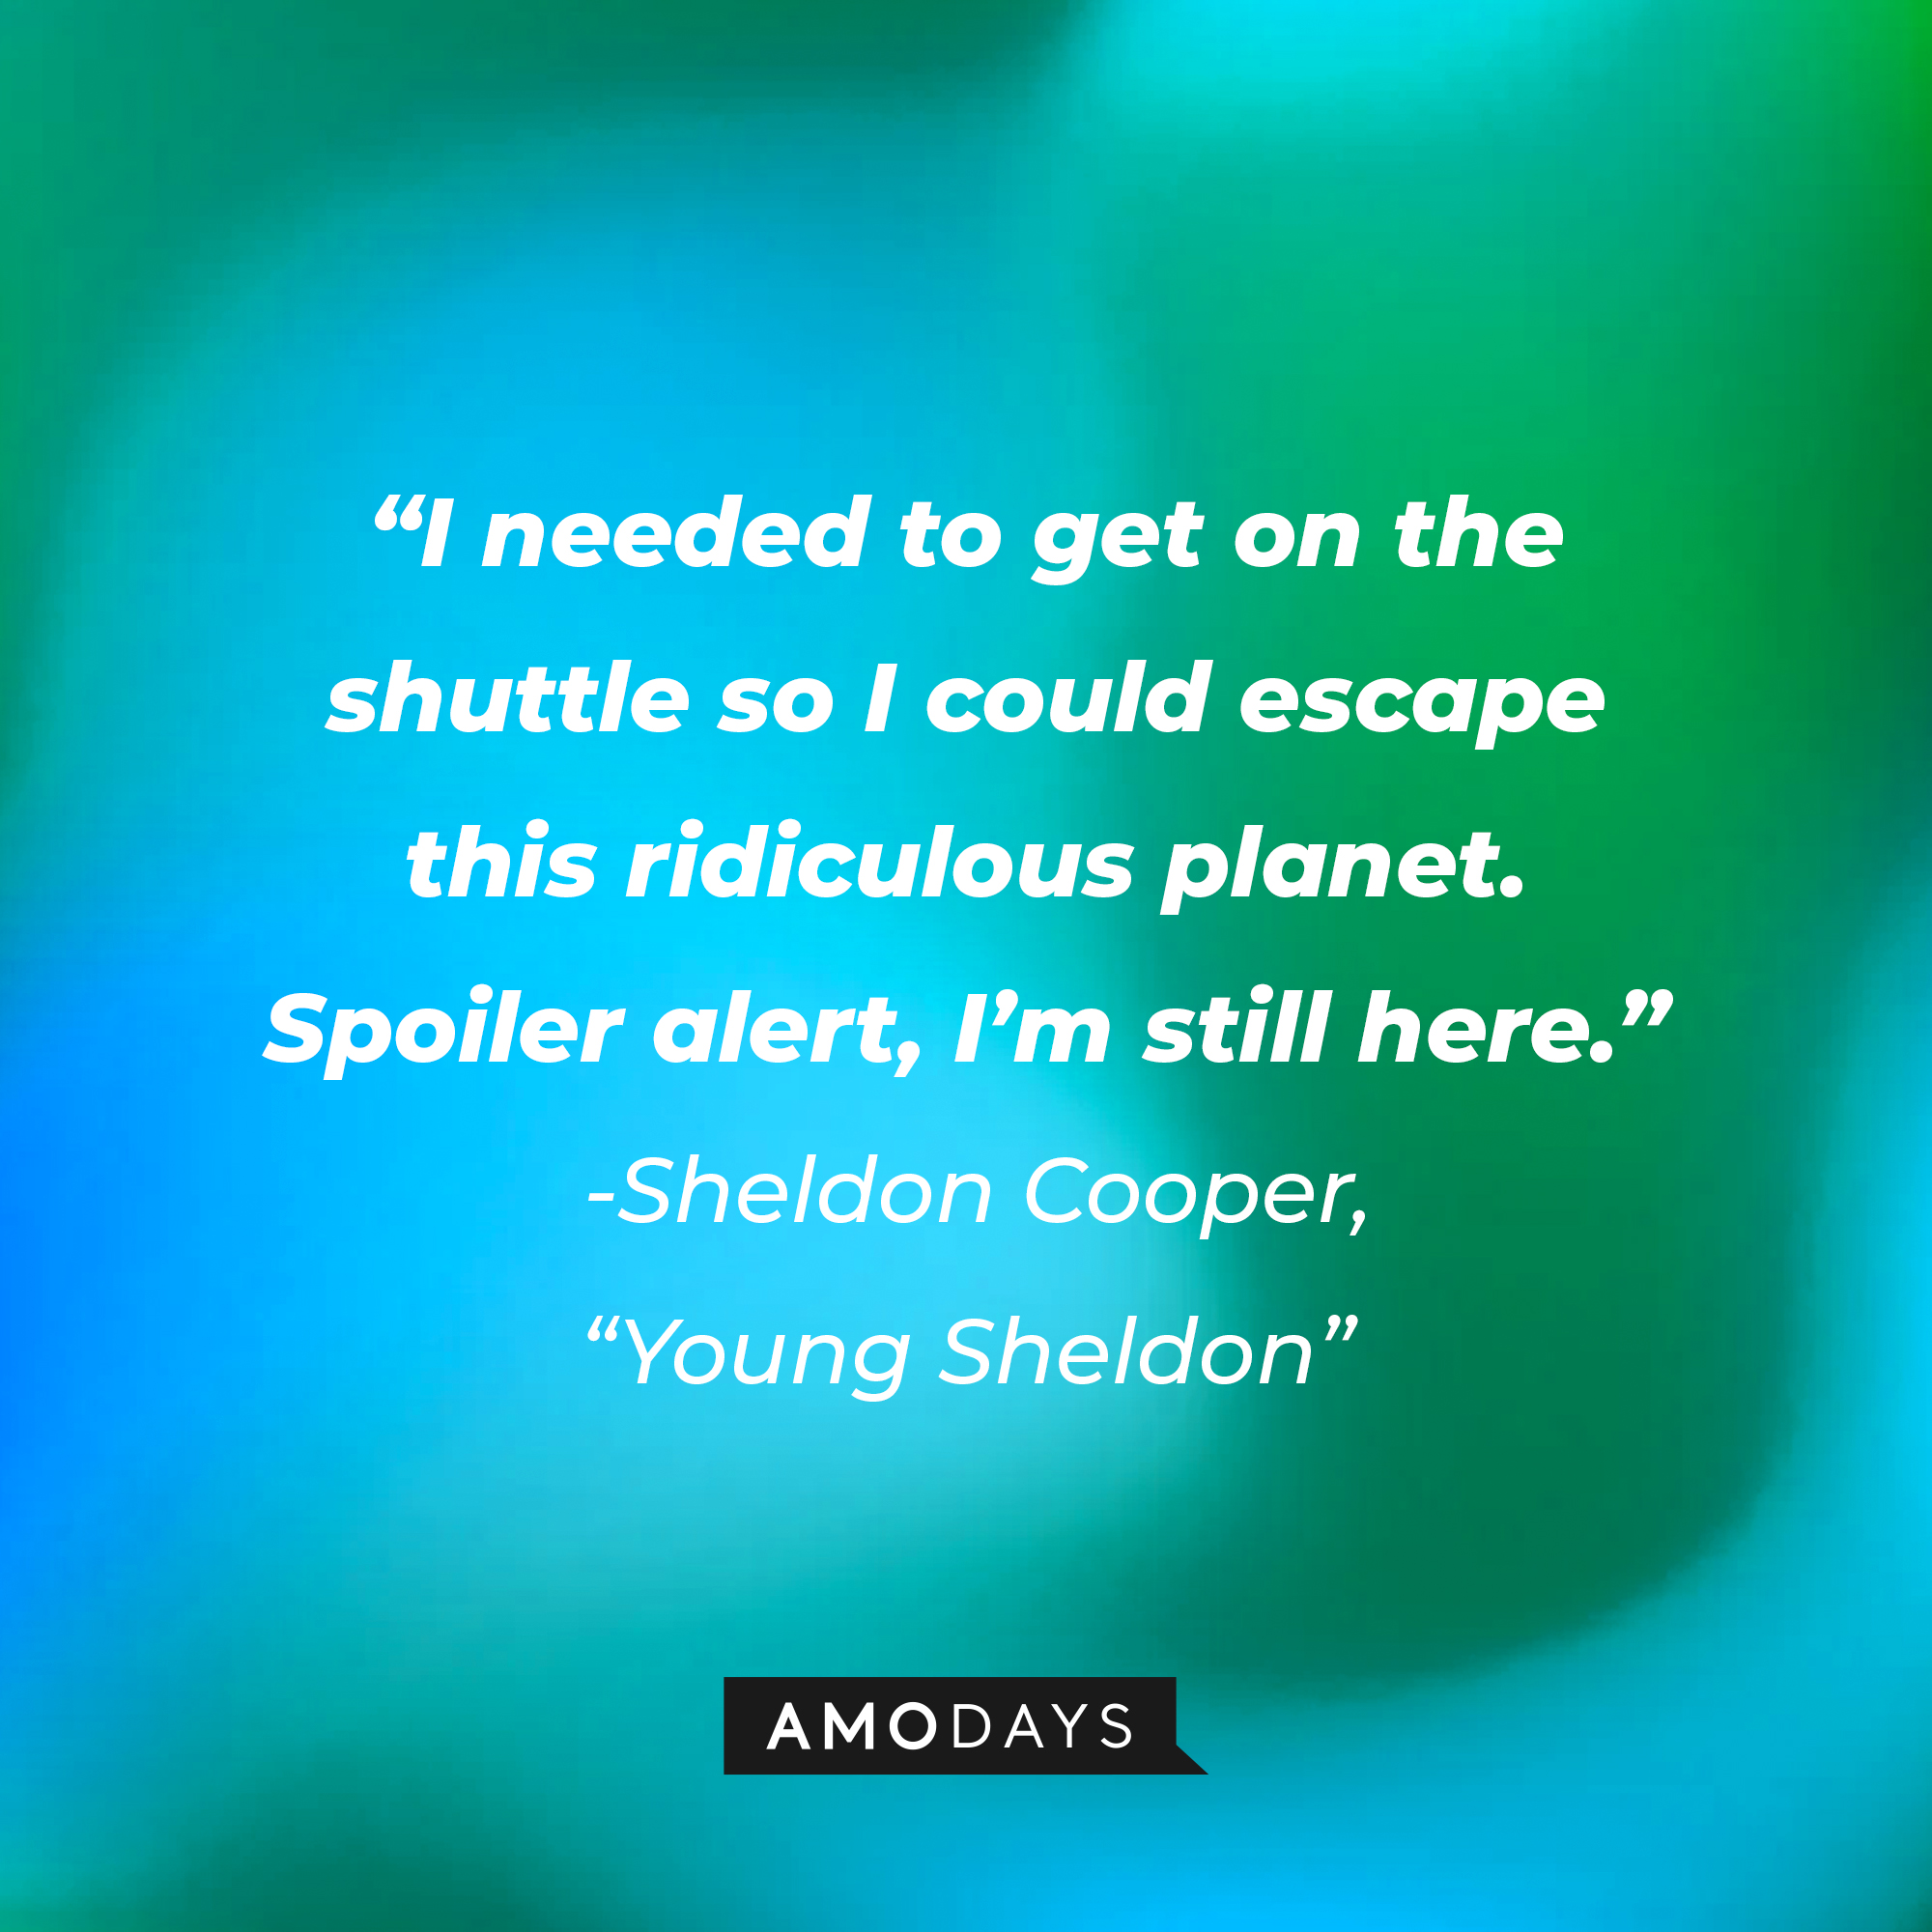 Sheldon Cooper's quote from "Young Sheldon": “I needed to get on the shuttle so I could escape this ridiculous planet. Spoiler alert, I’m still here.” | Source: Amodays